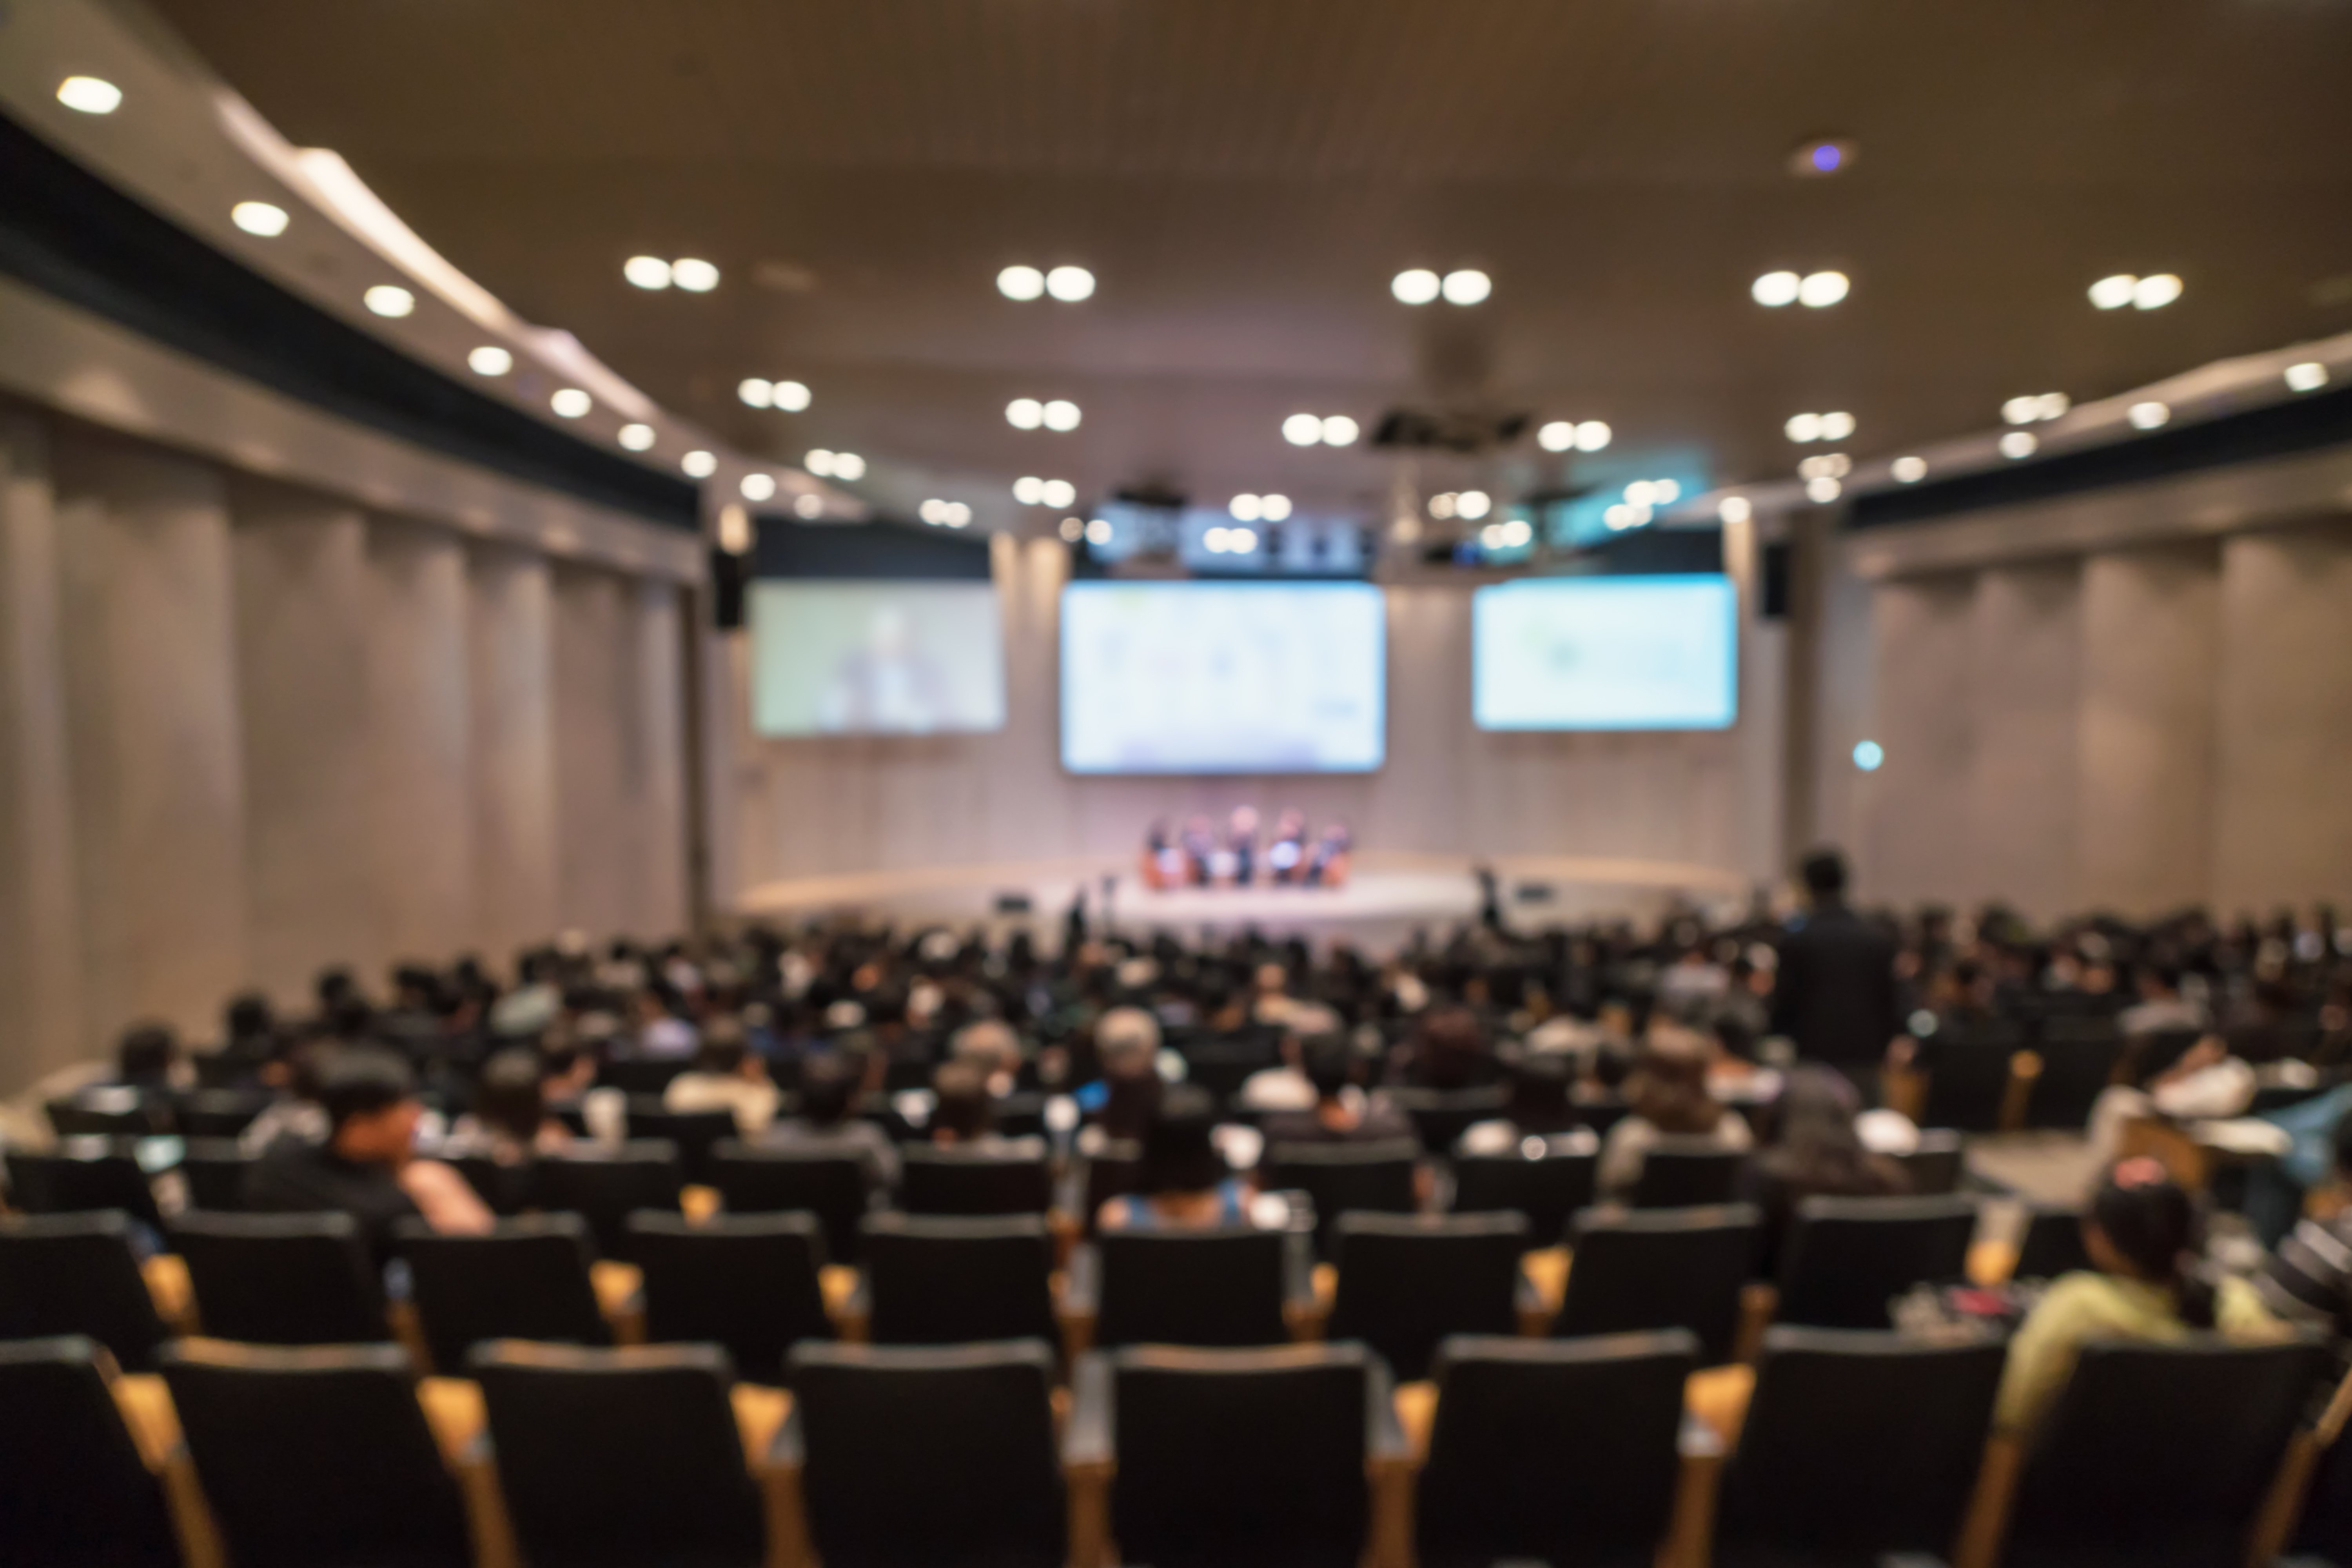 abstract-blurred-photo-conference-hall-seminar-room-with-speakers-stage